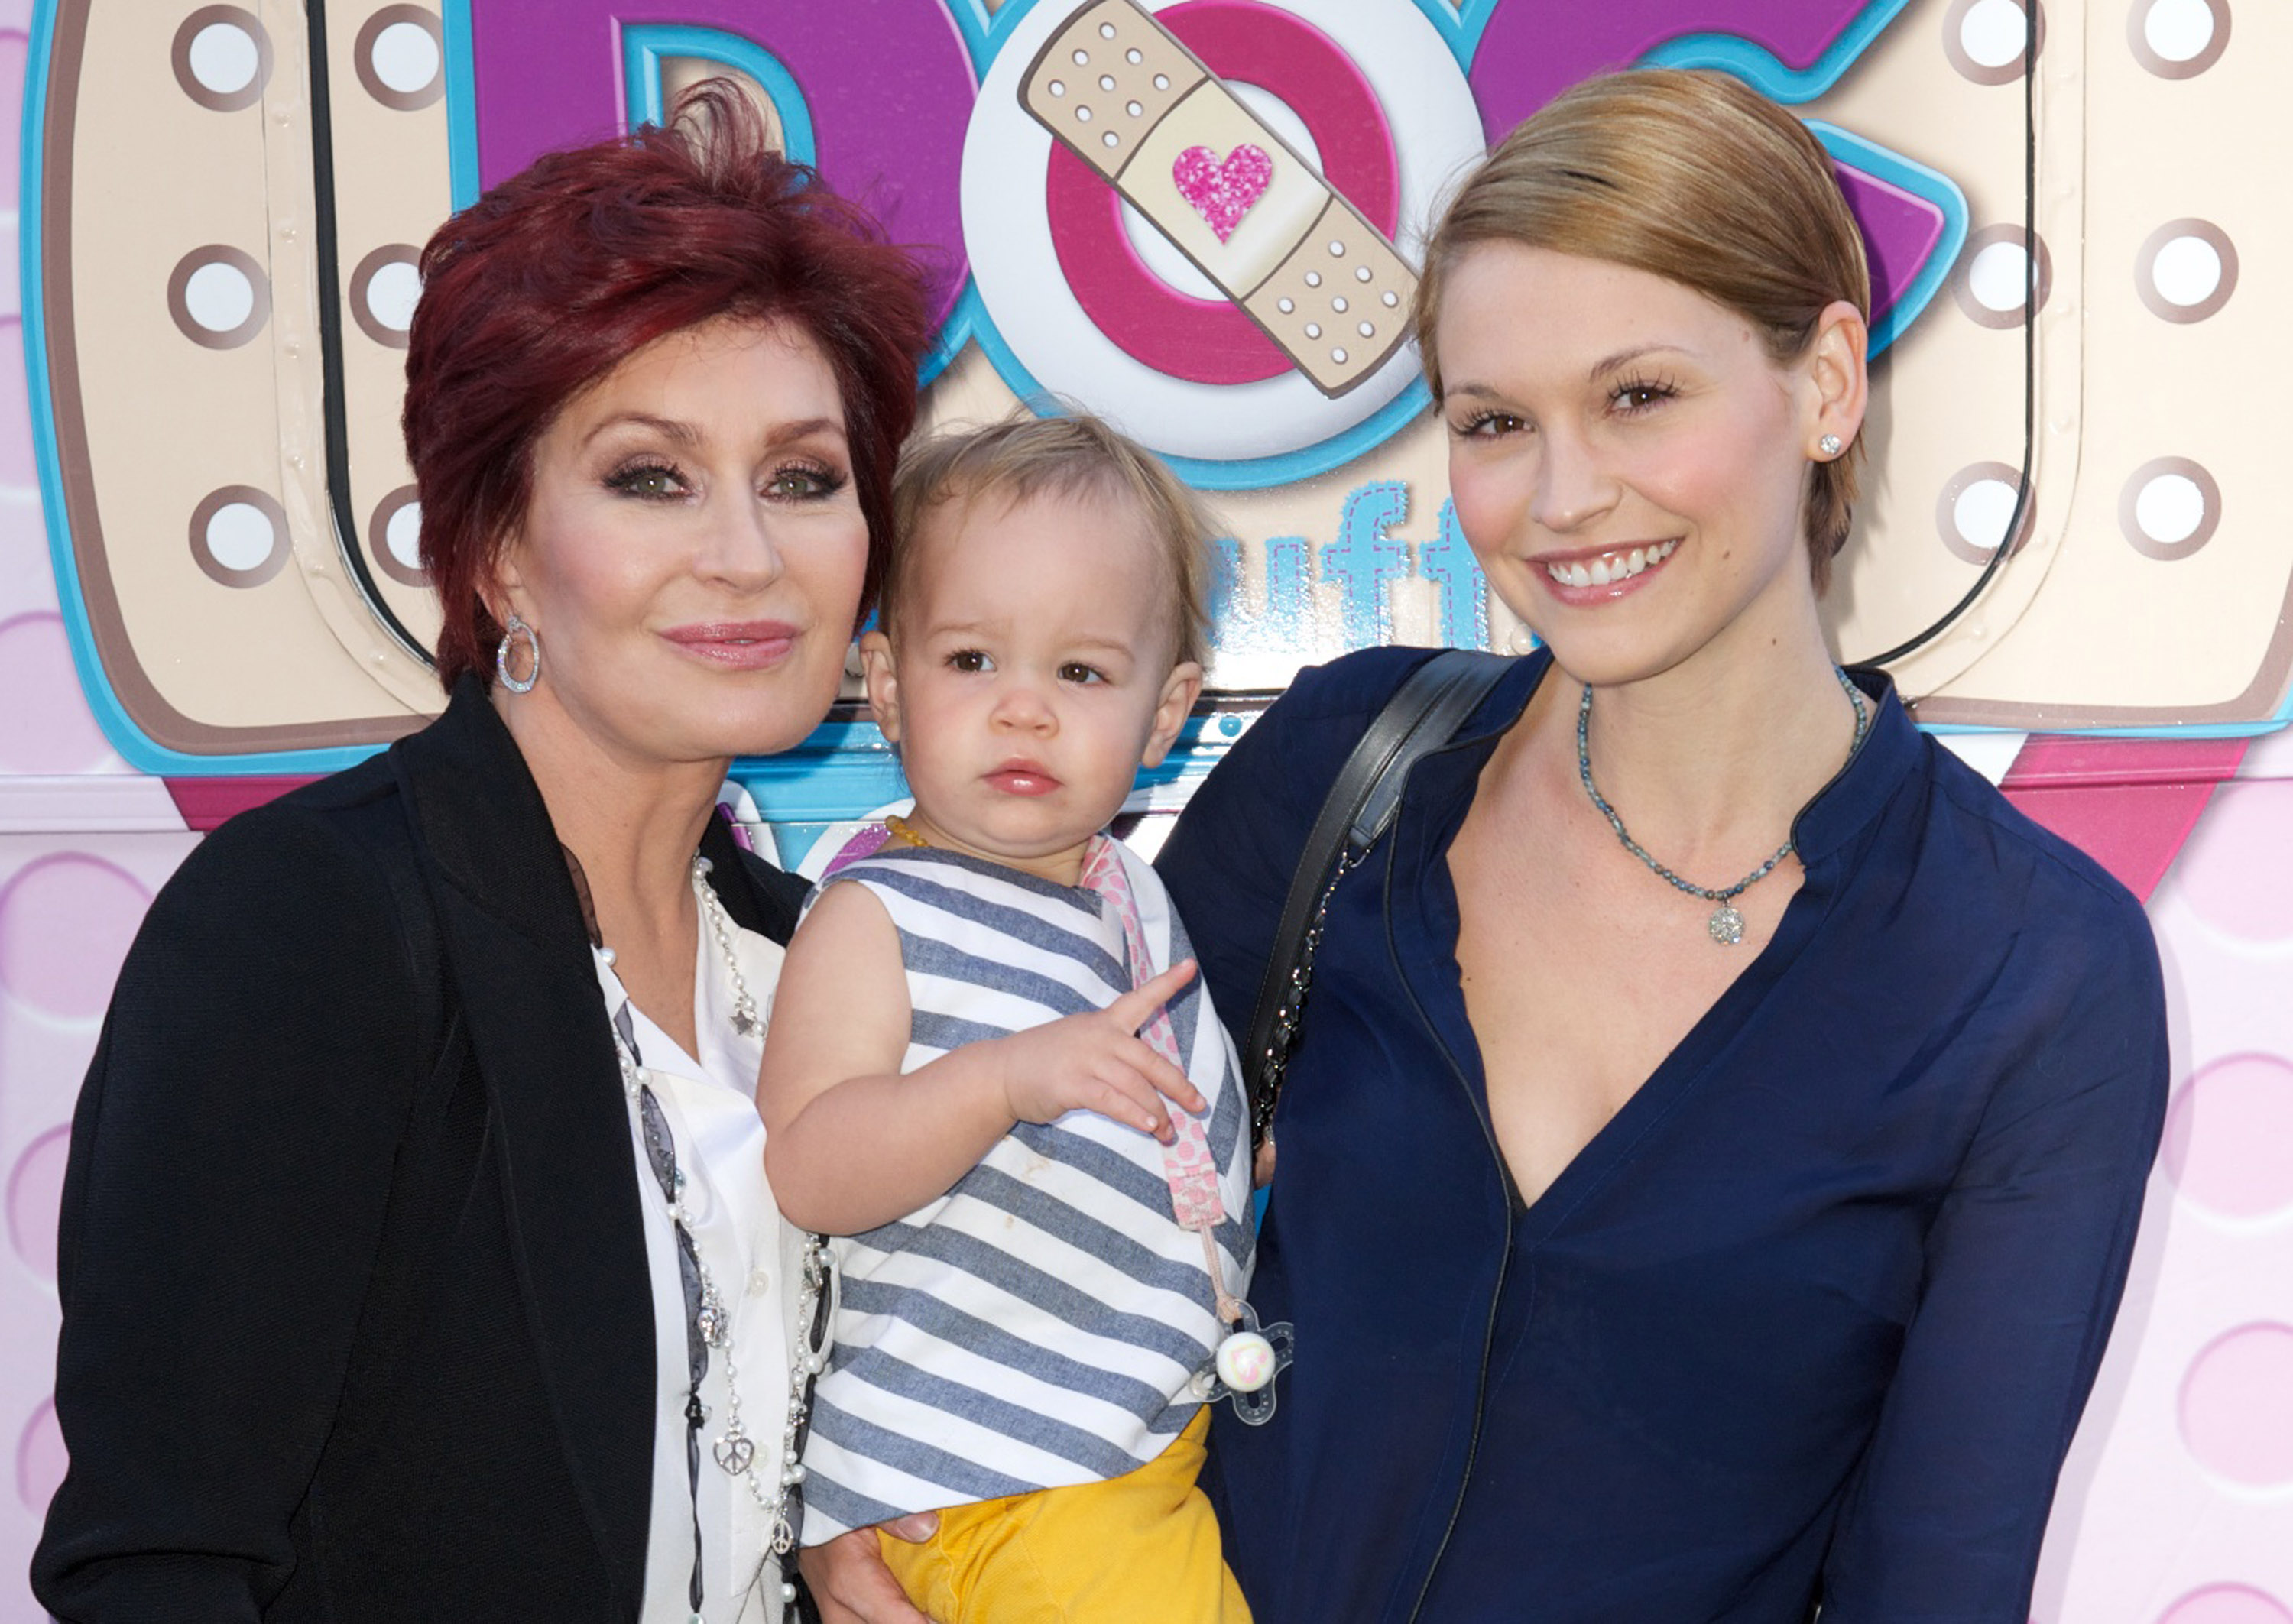 Sharon Osbourne, Pearl, and Lisa Stelly during the Disneys Juniour's "Doc McStuffins Doc Mobile" at the Grove on September 26, 2013, in Los Angeles, California. | Source: Getty Images